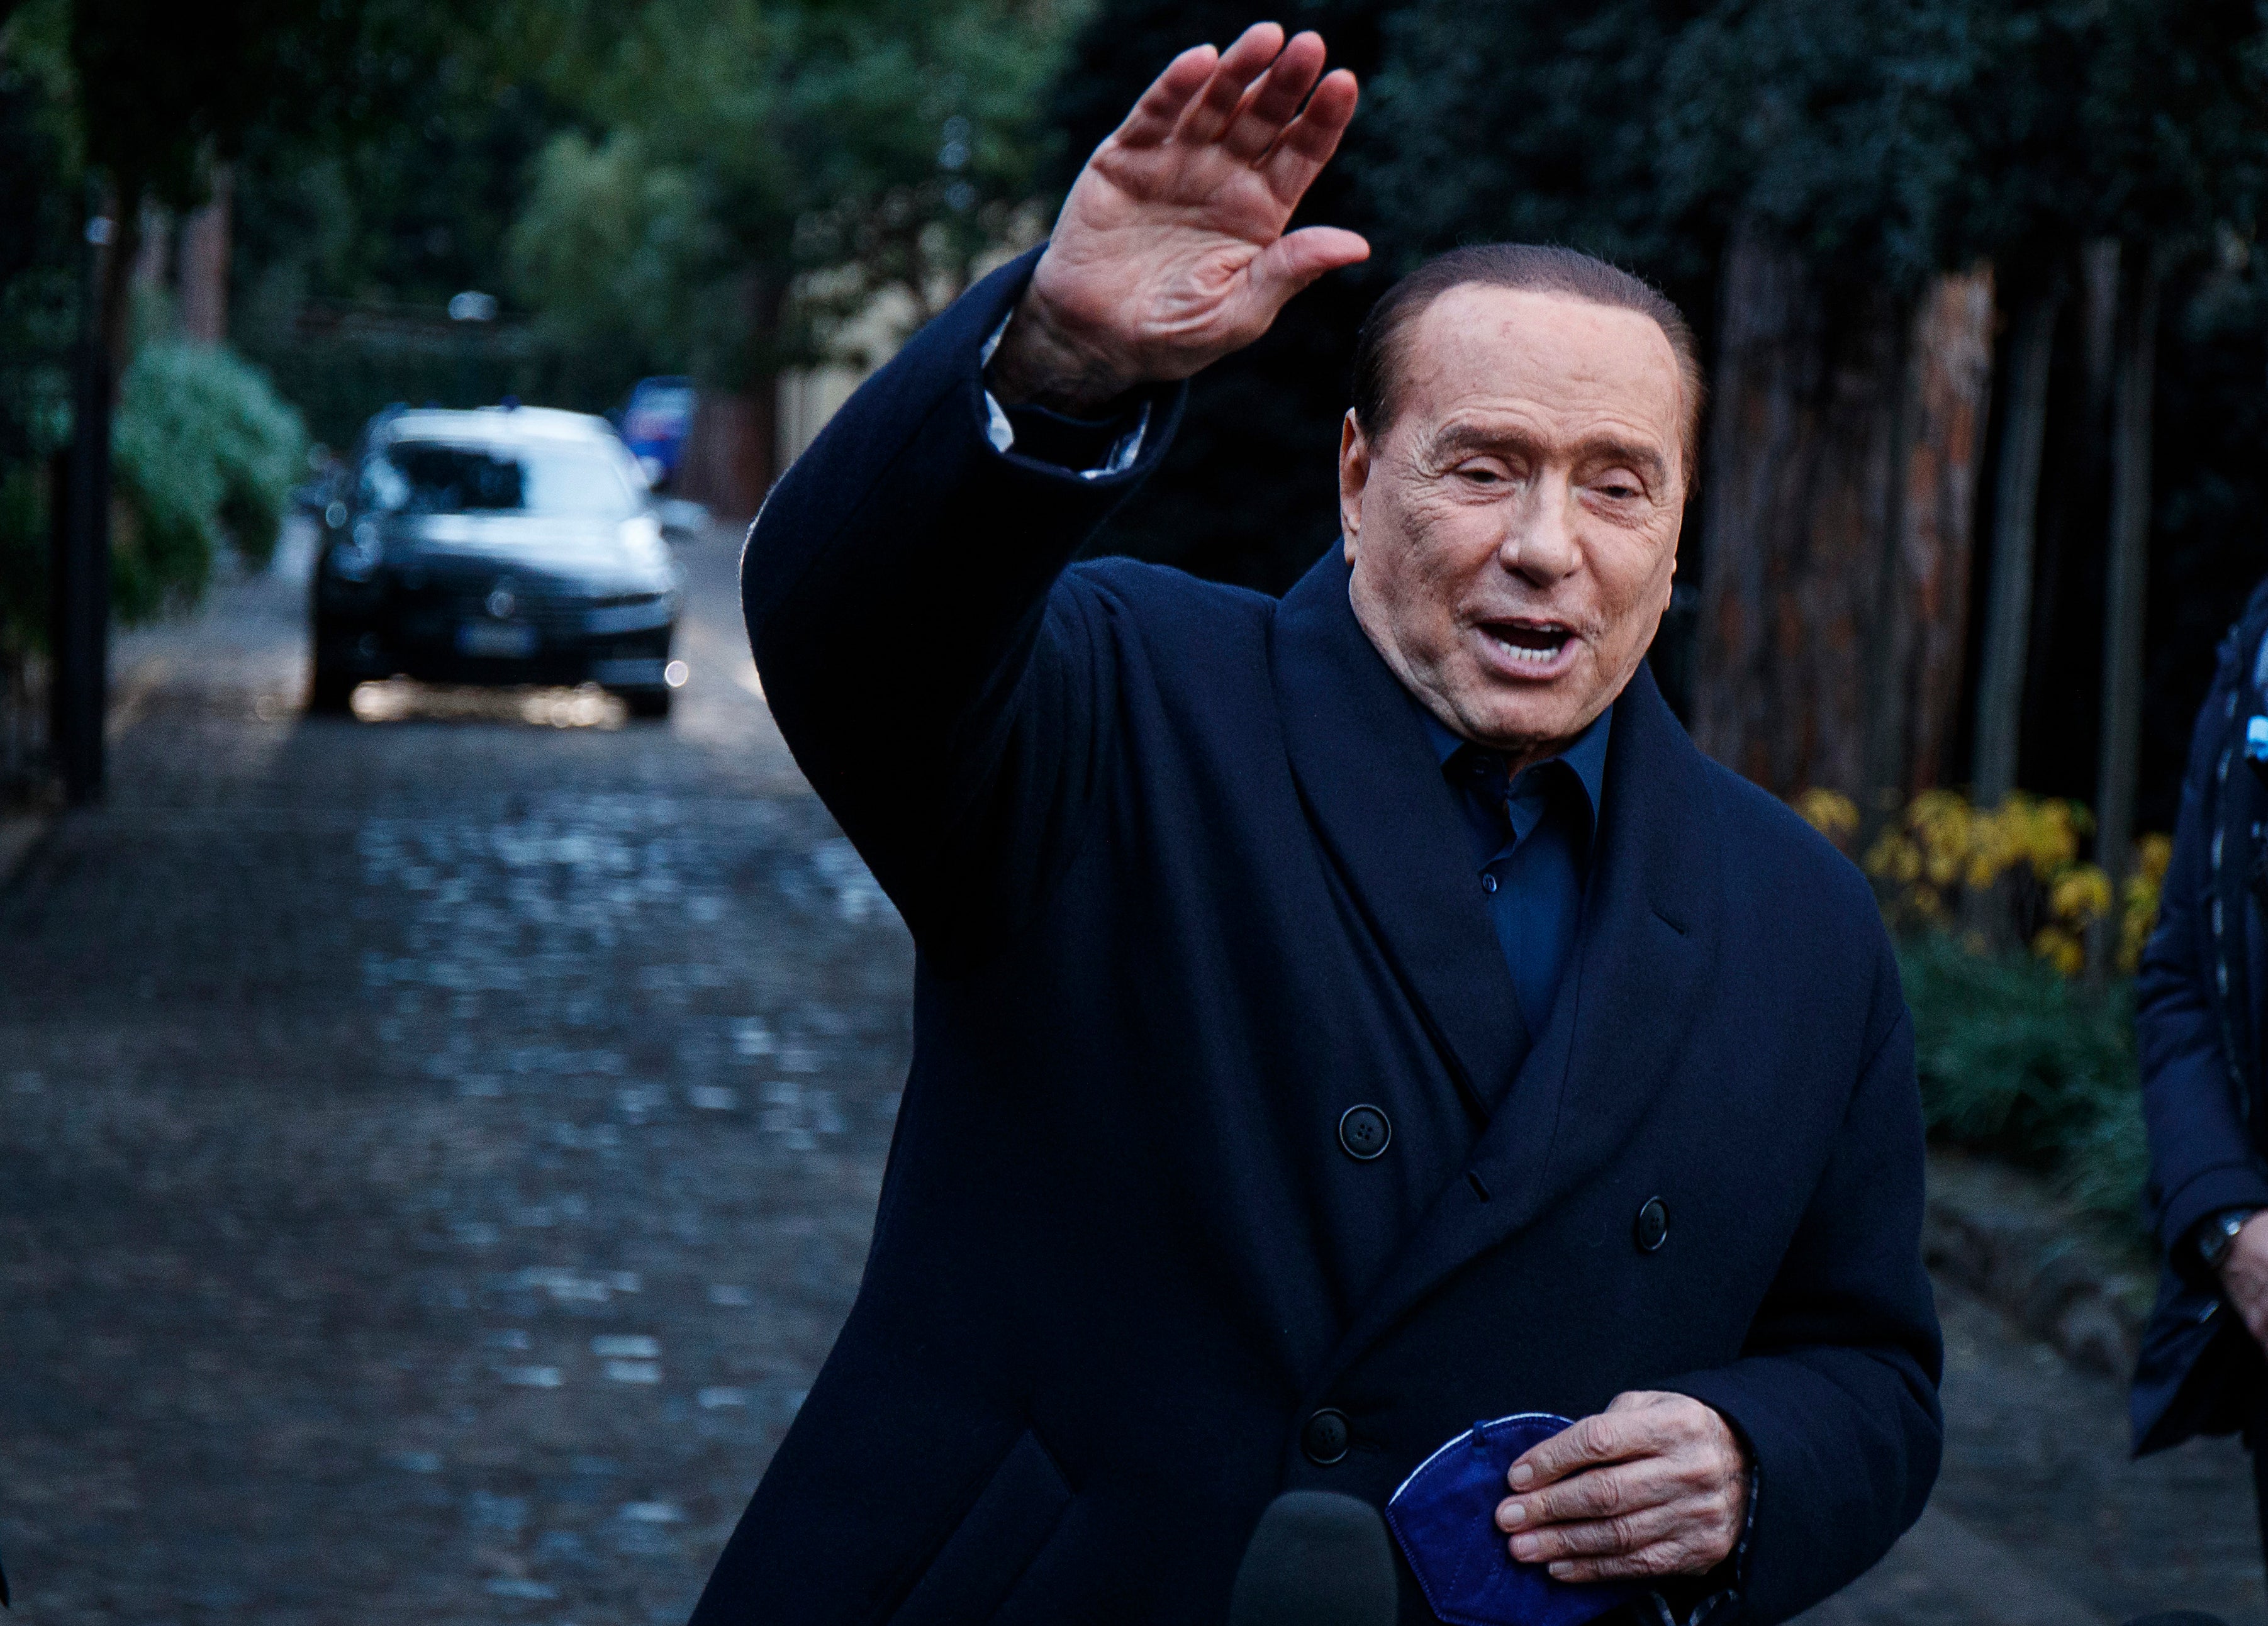 Berlusconi dropped his bid to become president earlier this year